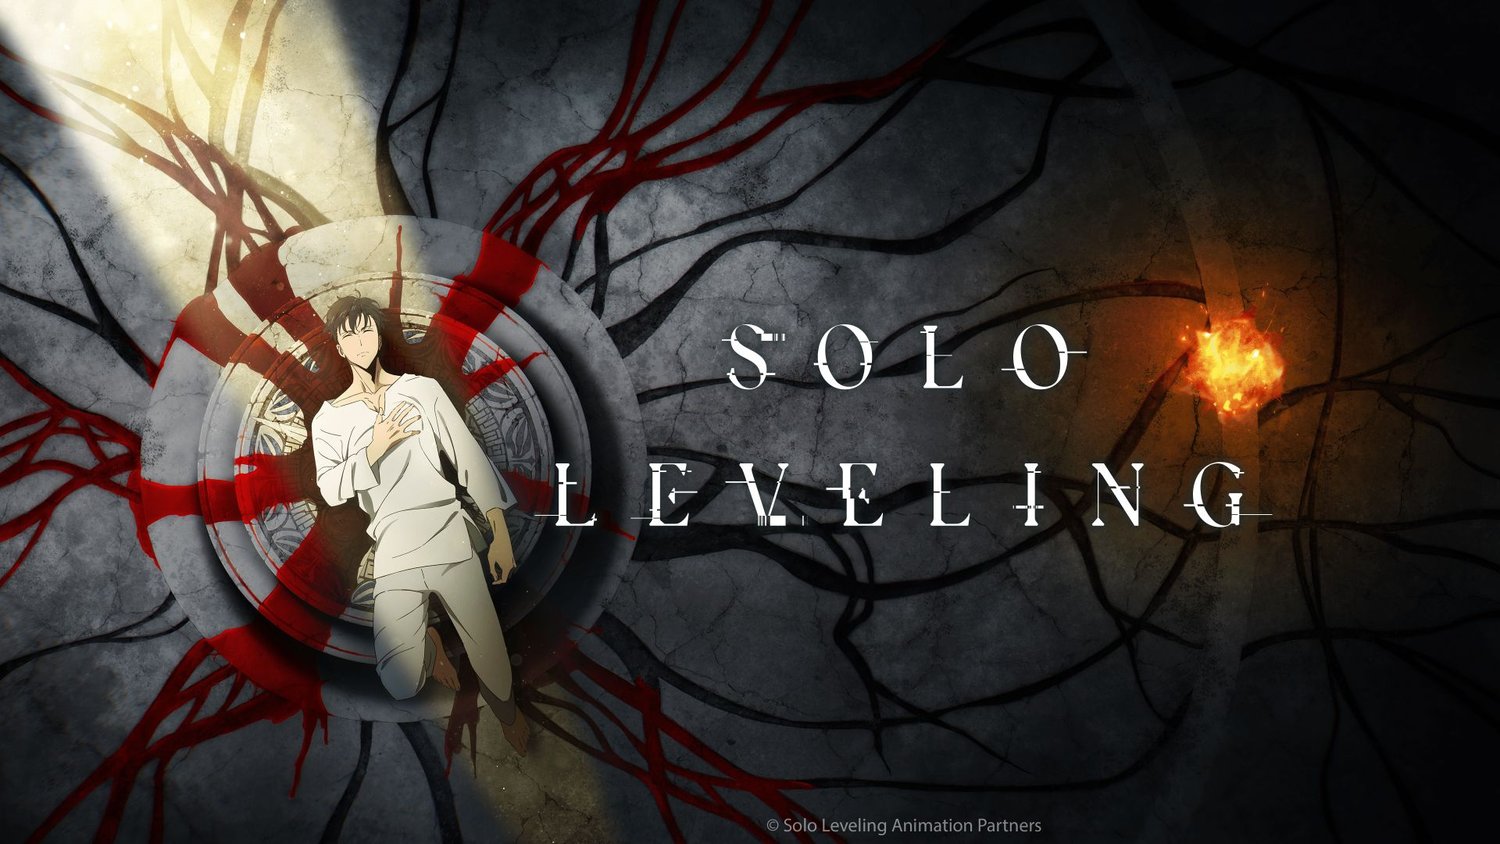 Enjoy the New Teaser for SOLO LEVELING Anime Adaptation